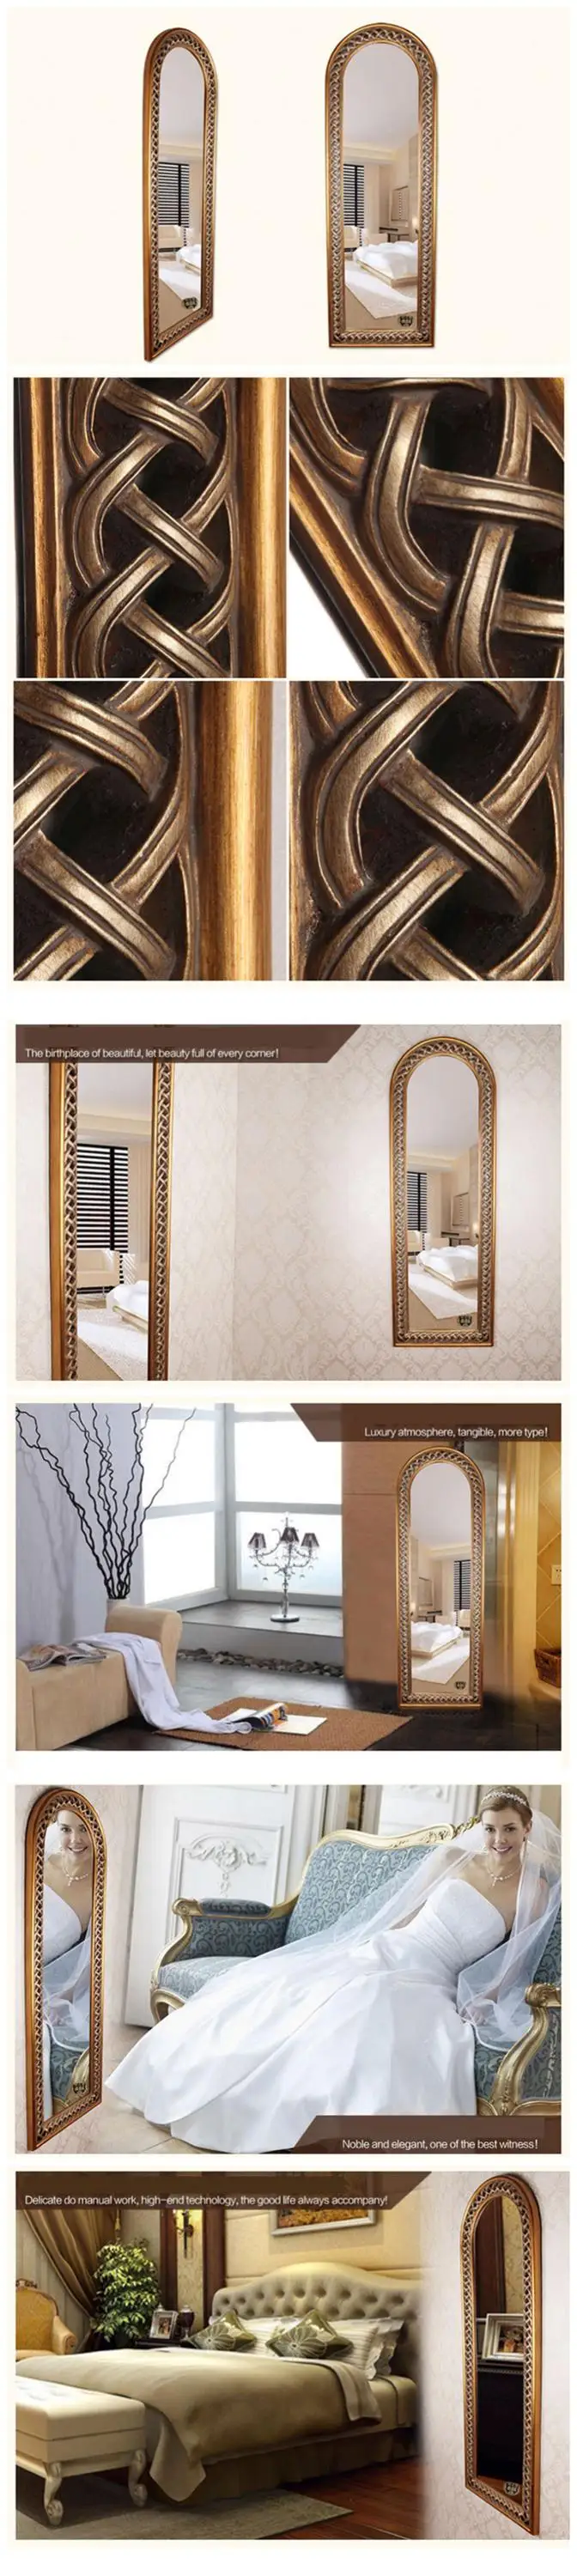 MOK polyurethyane framed decorative wall mounted arched bedroom mirror